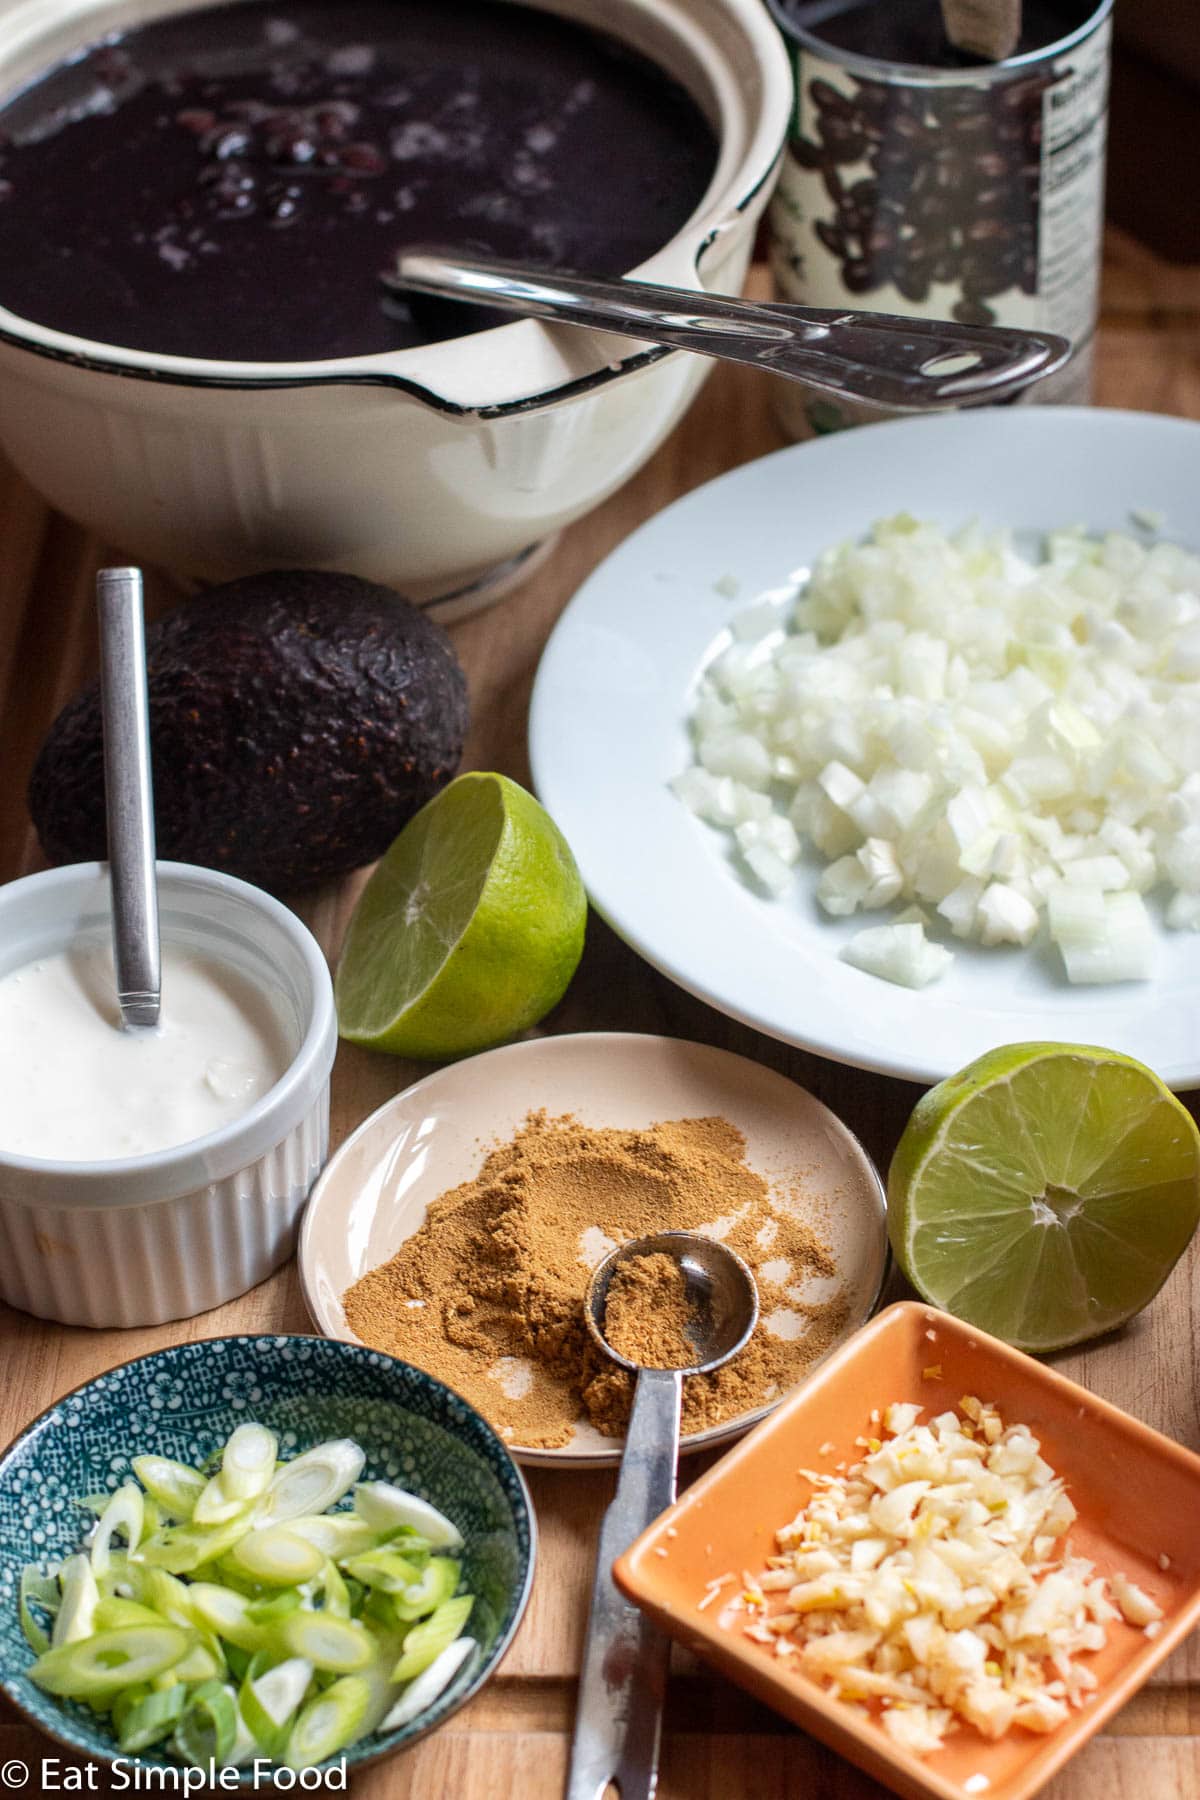 Ingredients: large bowl of black beans in liquid, bowl of sour cream, small bowl of raw chopped garlic, plate of diced onions, container of ground cumin with spoon, 2 lime halves, whole avocado, container of sliced green onions.